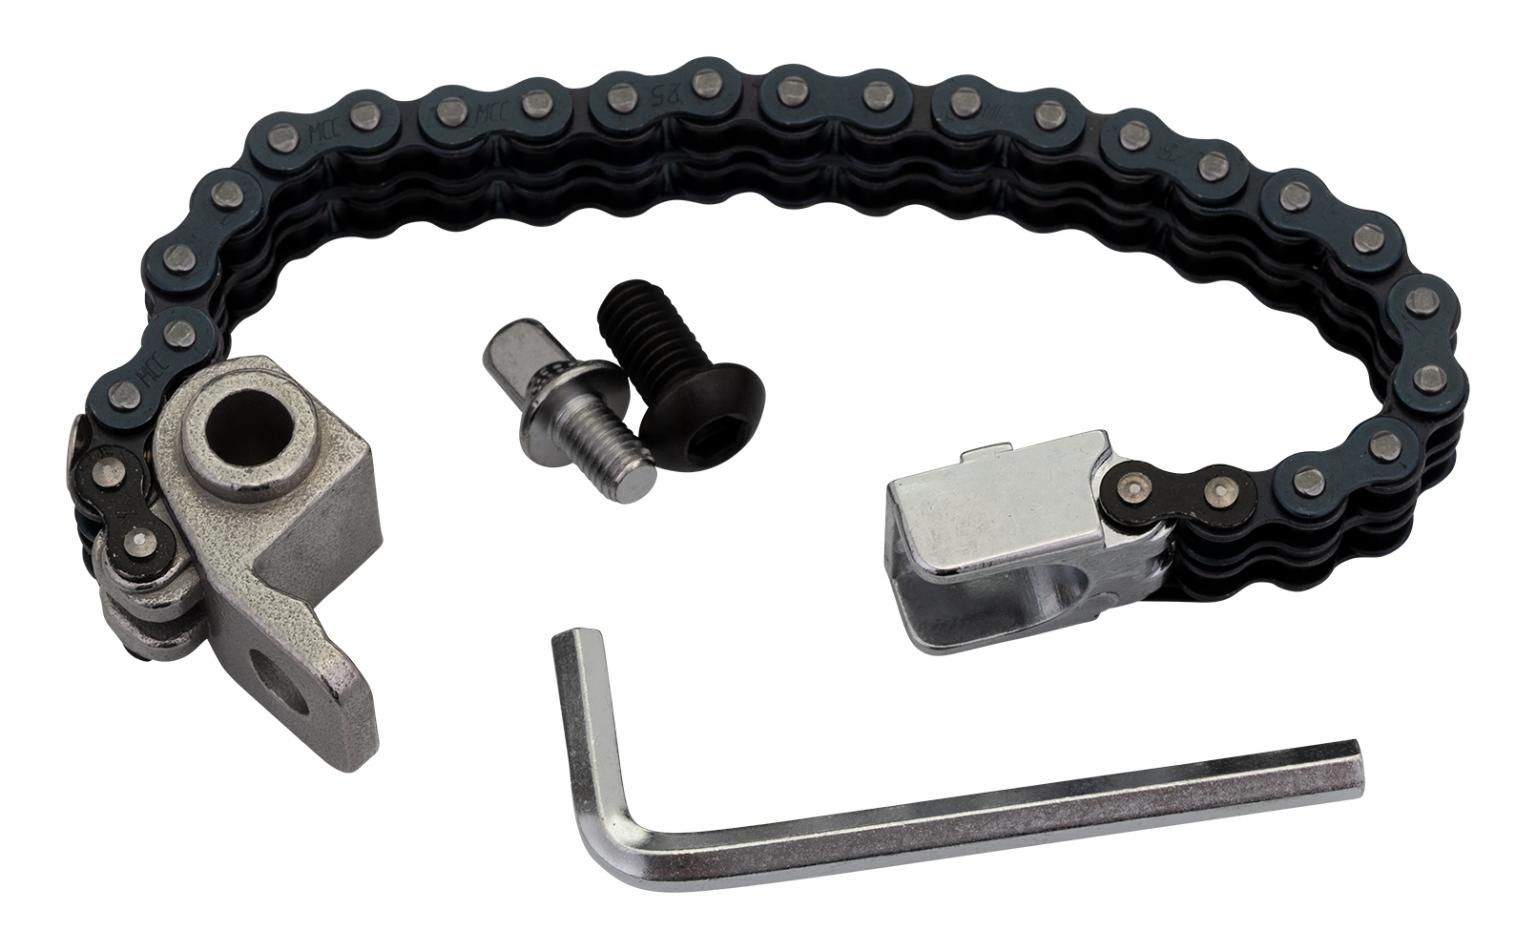 Drum Pedal Chain and Belt Assembly | パール楽器【公式サイト】Pearl